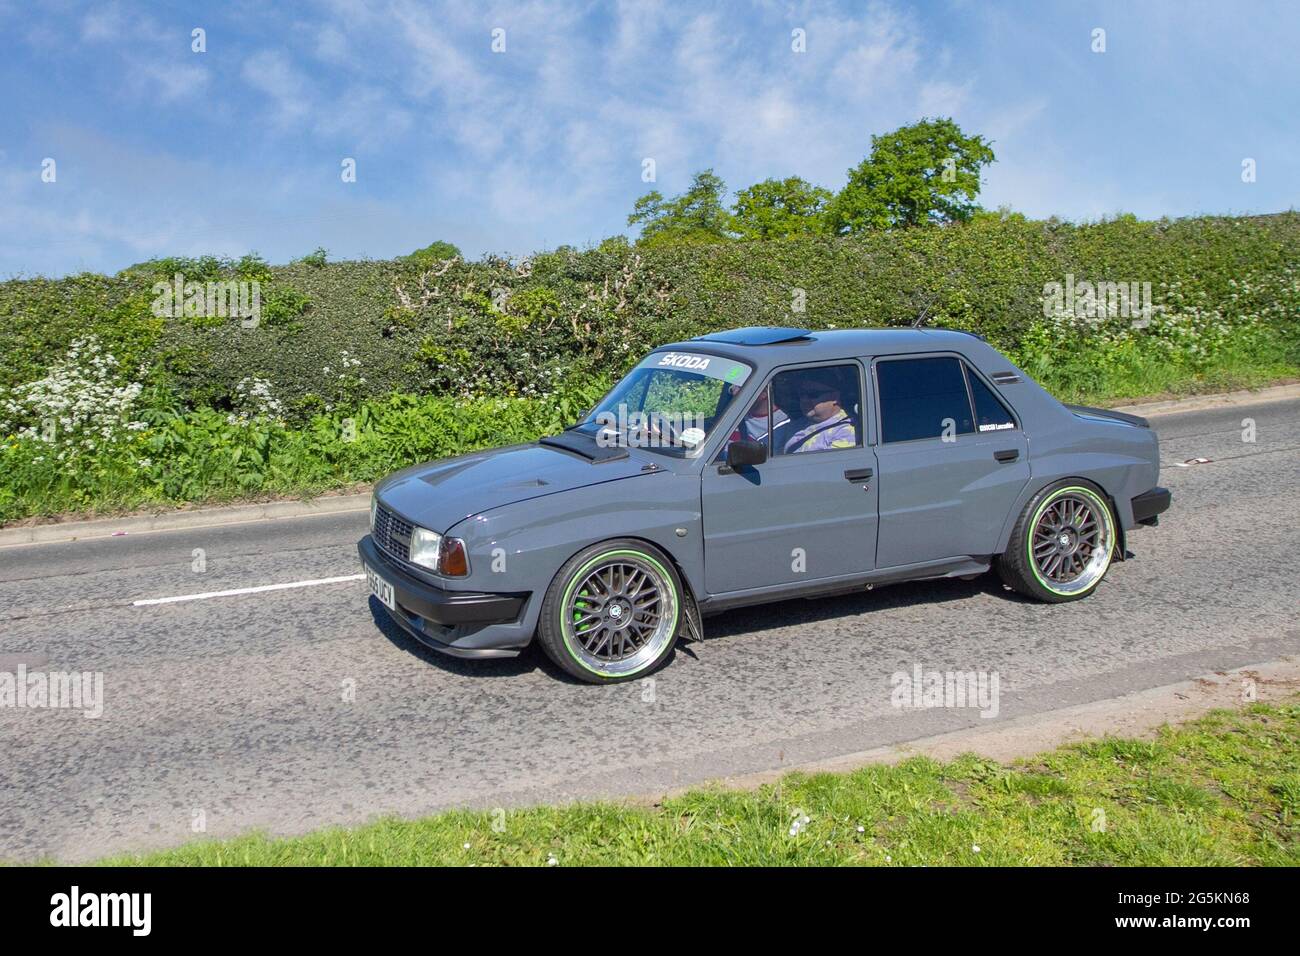 1988 90s grey Skoda LSE 4dr saloon, 1289cc petrol en-route to Capesthorne Hall classic May car show, Cheshire, UK Stock Photo